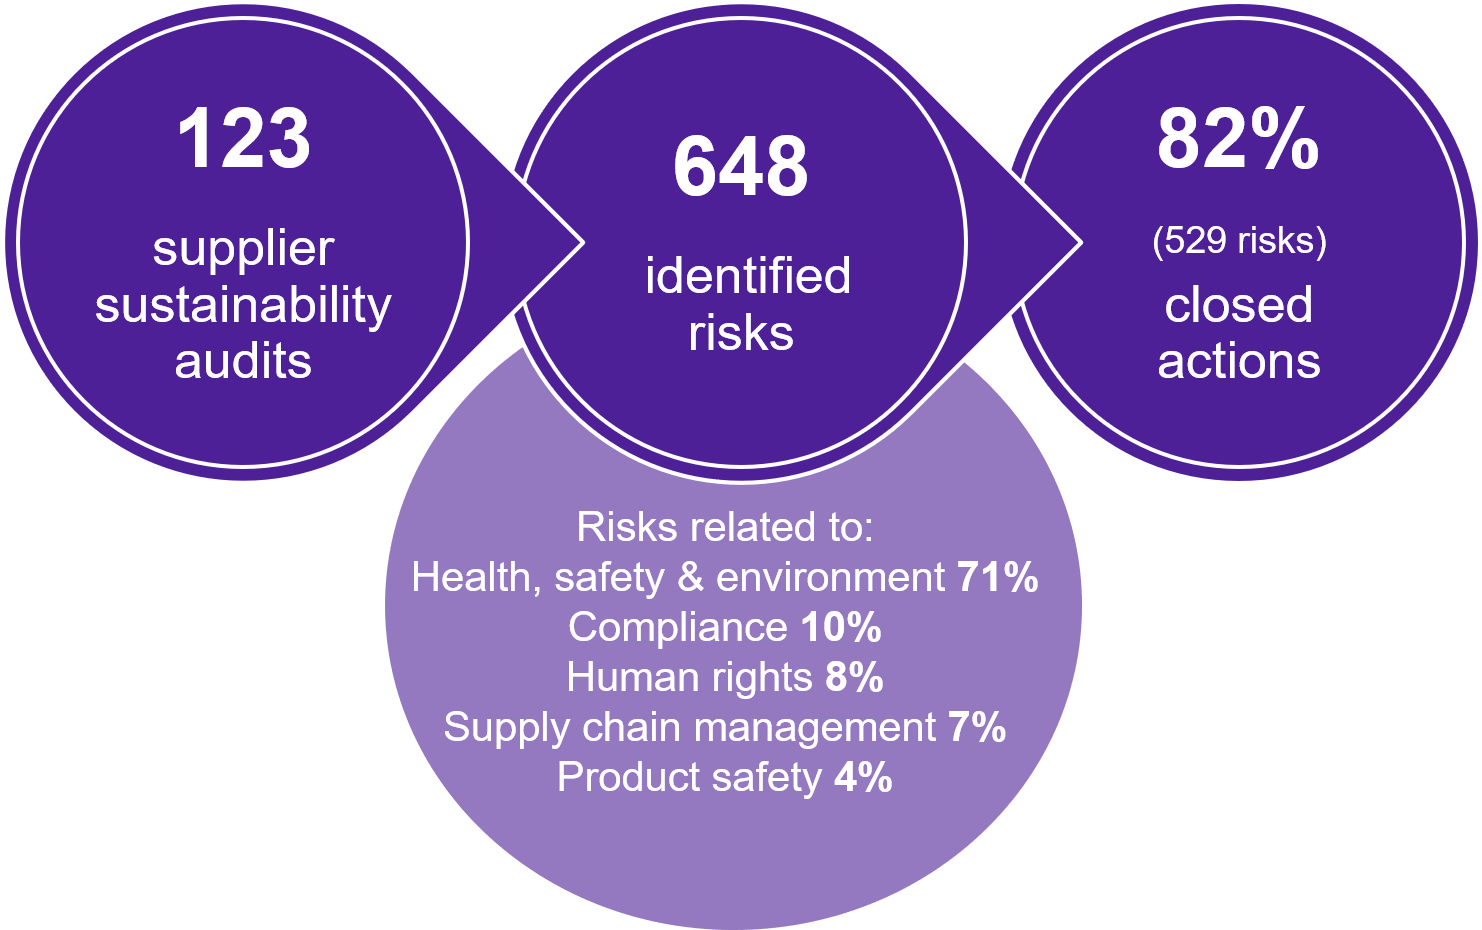 Graph showing supplier sustainability audits, identified risks and closed actions. 